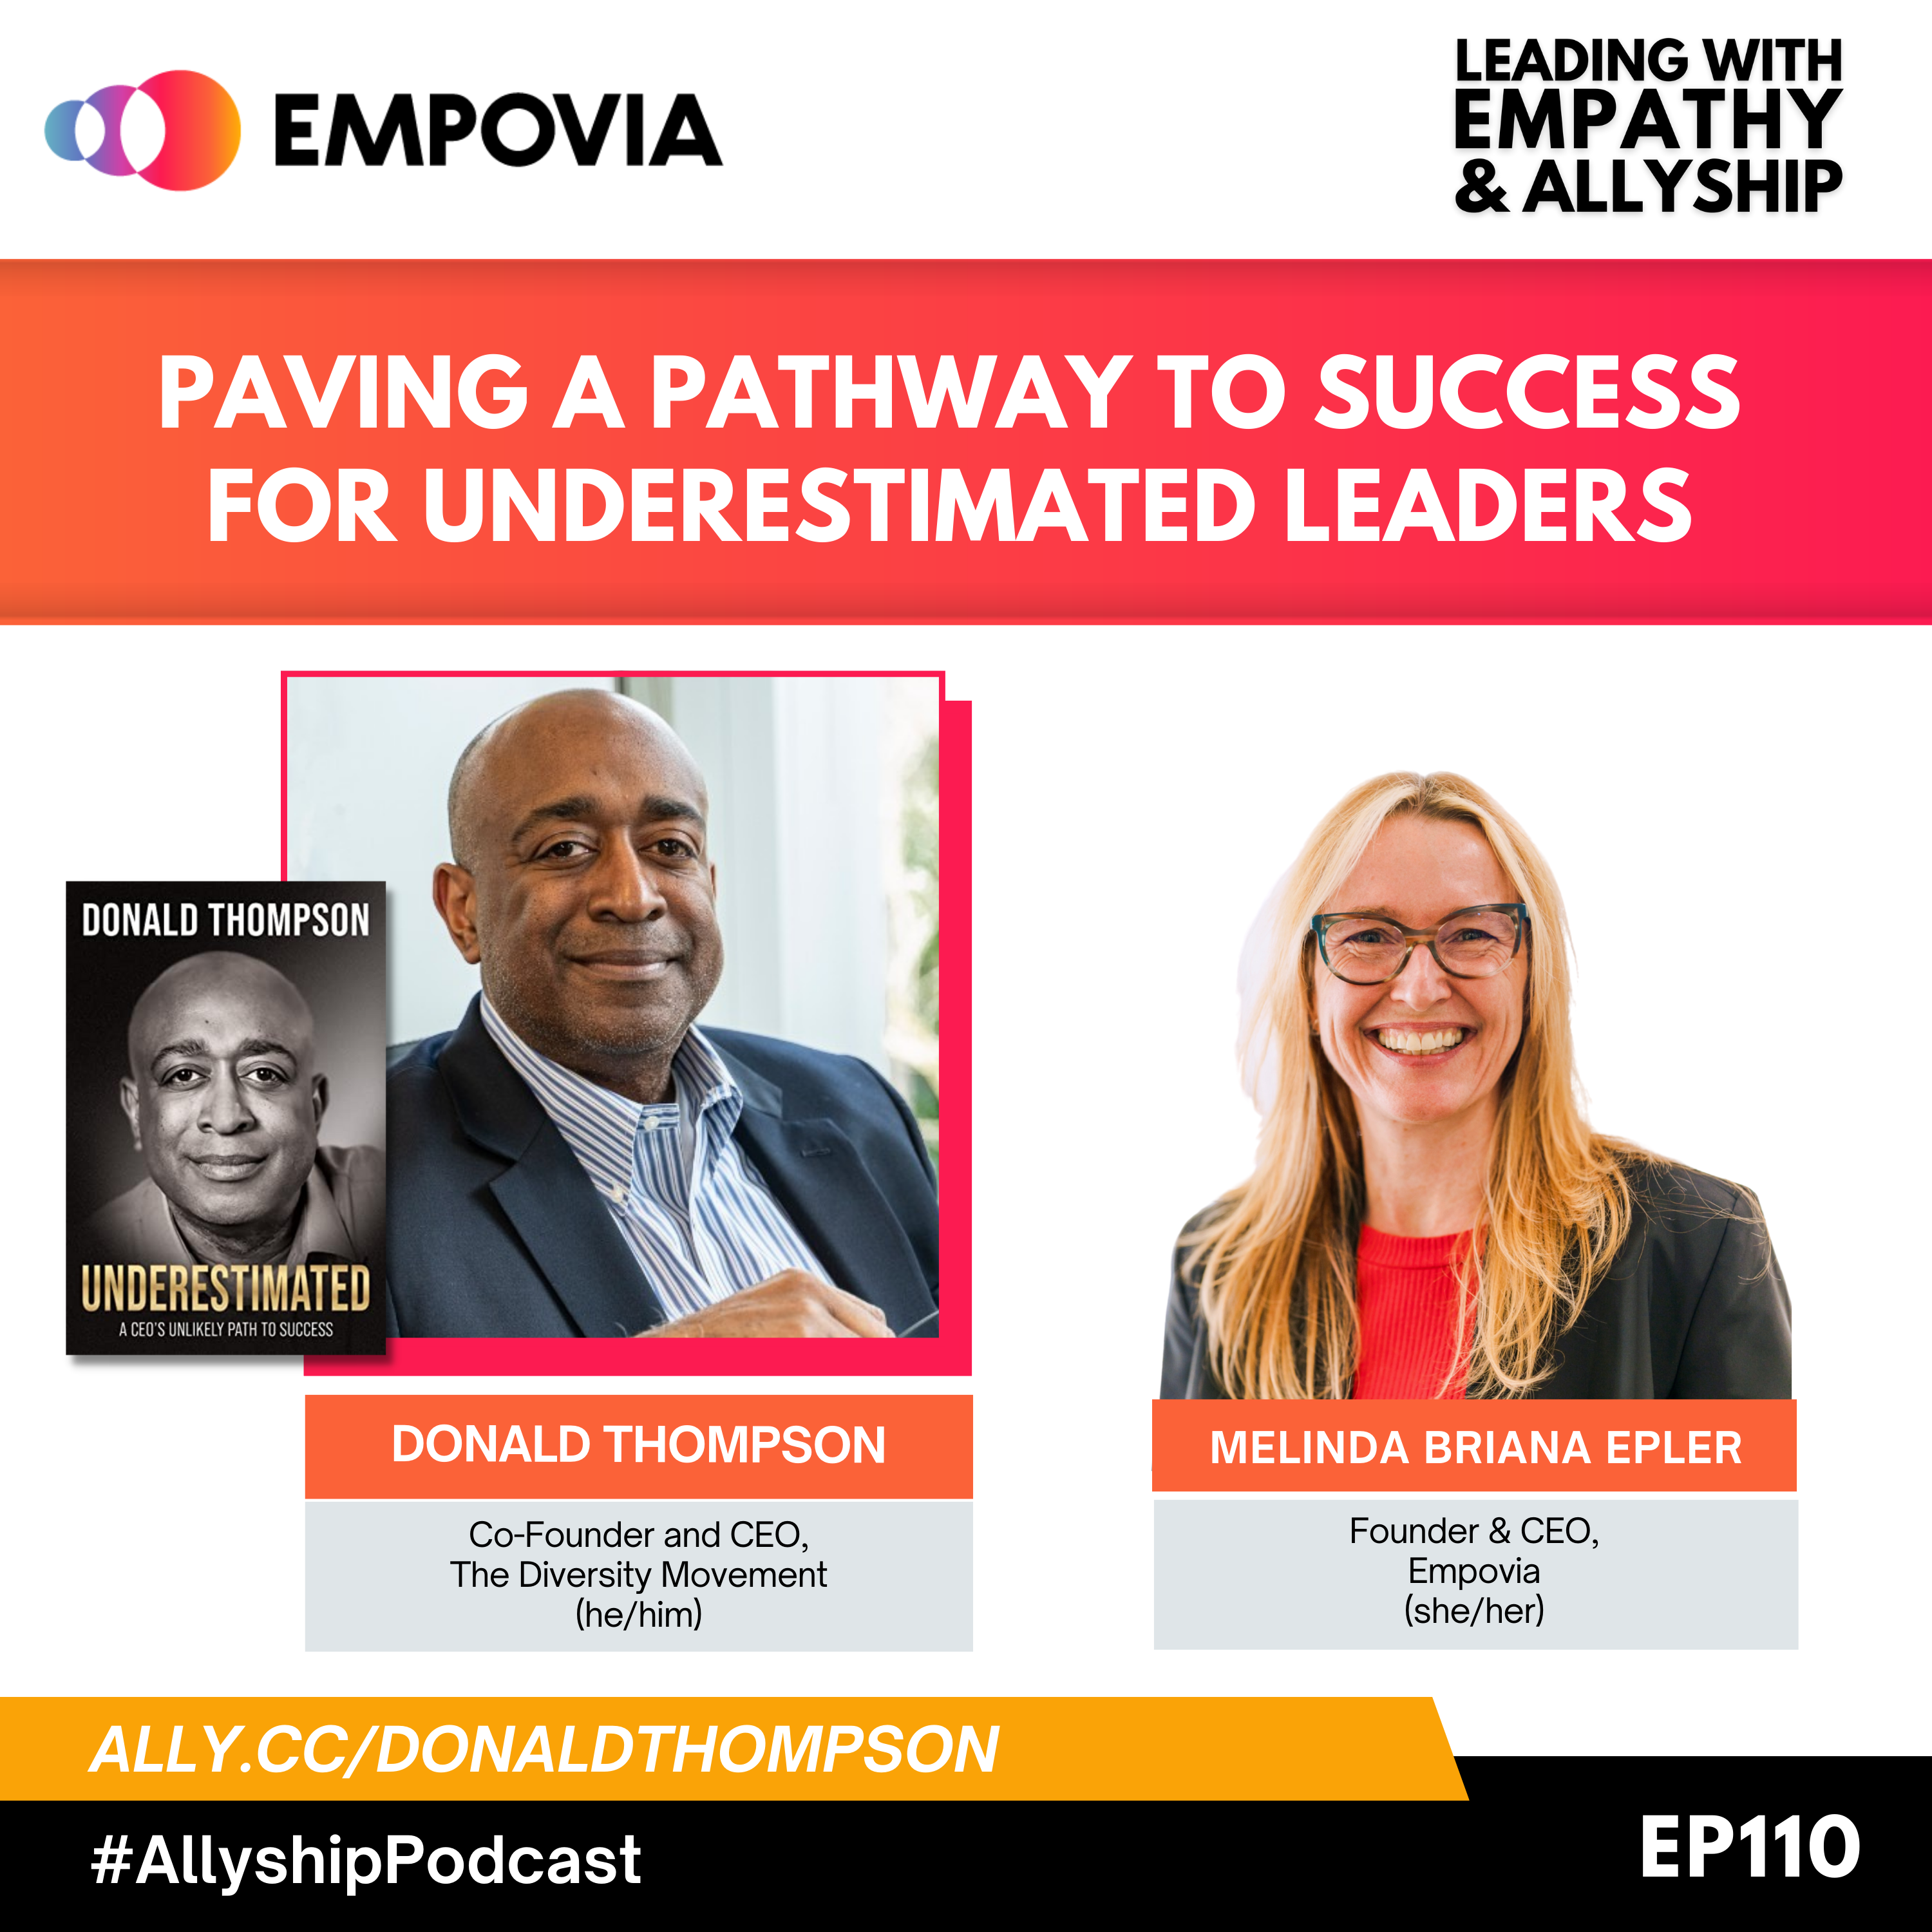 Leading With Empathy & Allyship promo and photos of Donald Thompson,a Black CEO with salt and pepper buzzed facial hair, white/blue striped button-down shirt, and navy blue suit; beside him is a black book cover of UNDERESTIMATED: A CEO’S UNLIKELY PATH TO SUCCESS; and host Melinda Briana Epler, a White woman with blonde and red hair, glasses, red shirt, and black jacket.